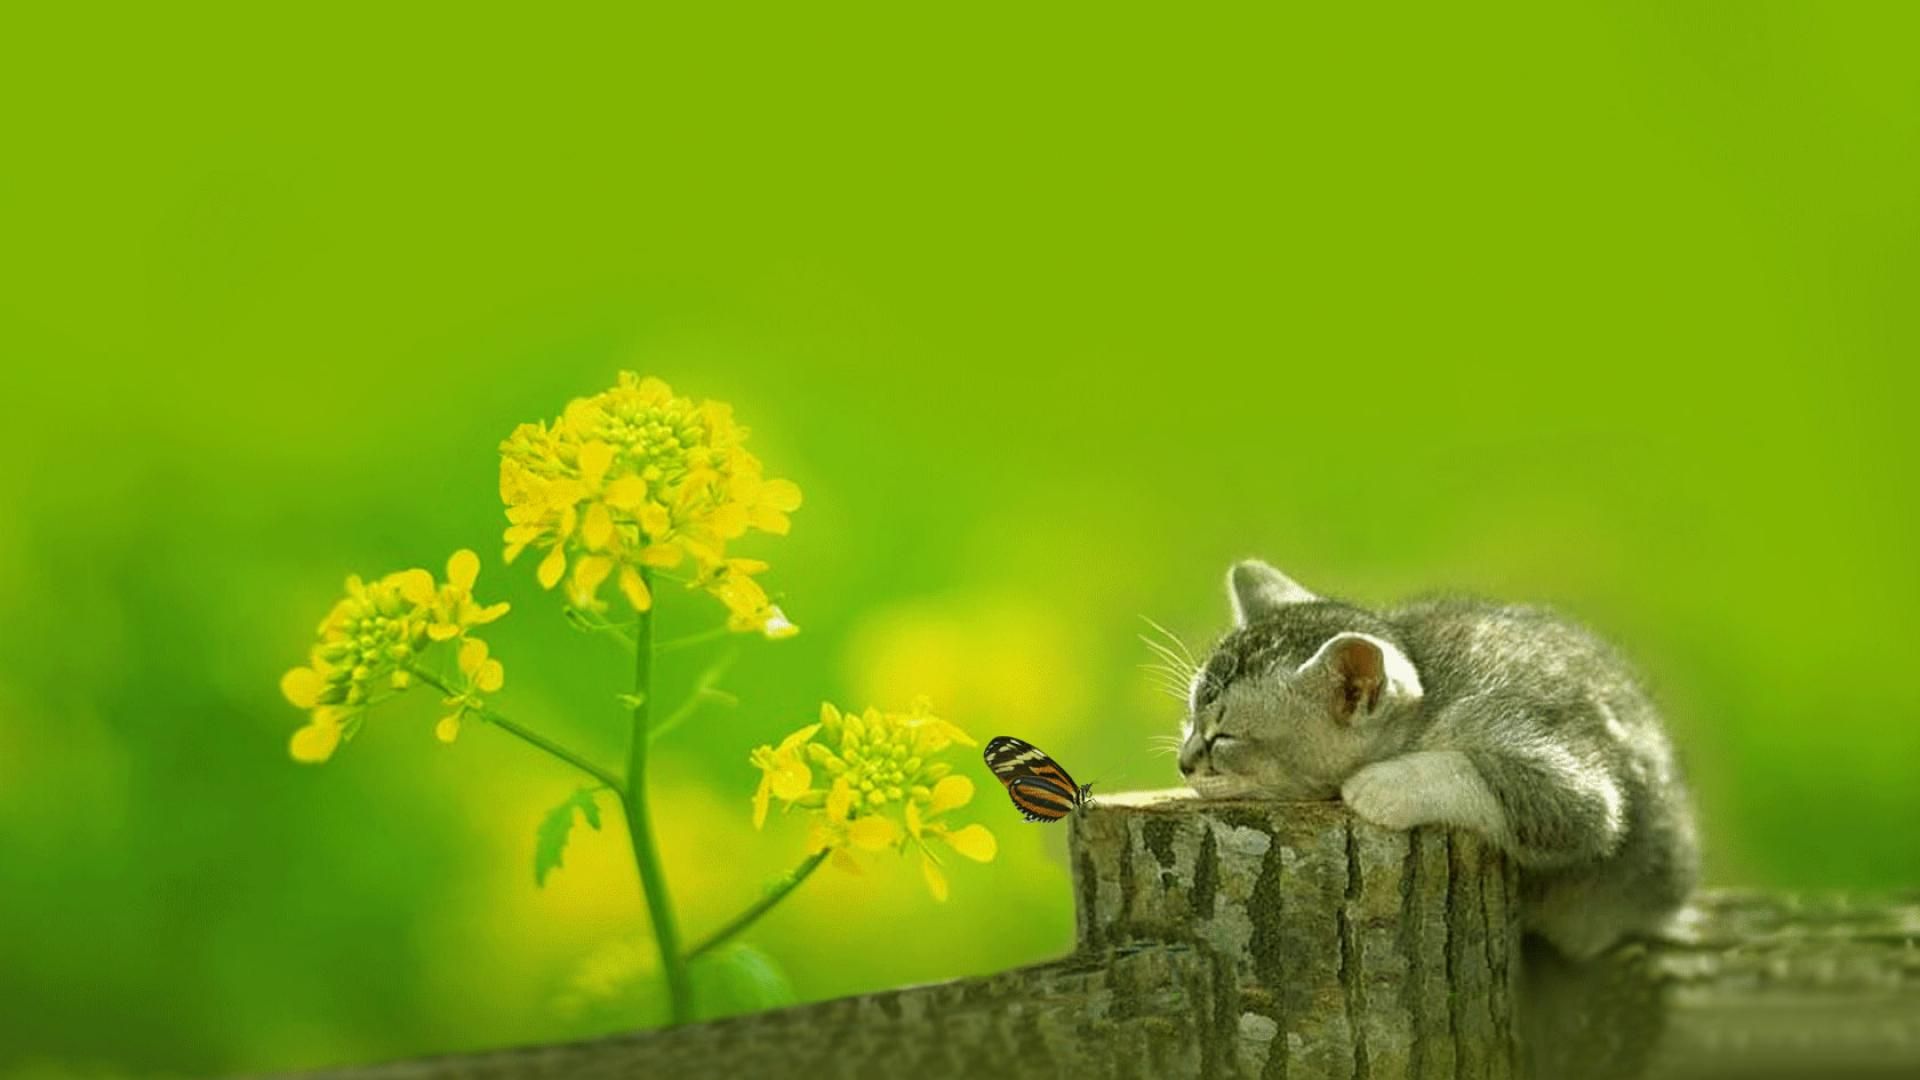 Cute Wallpaper Cat Wallpapers Background Backgrounds 1920x1080 ...